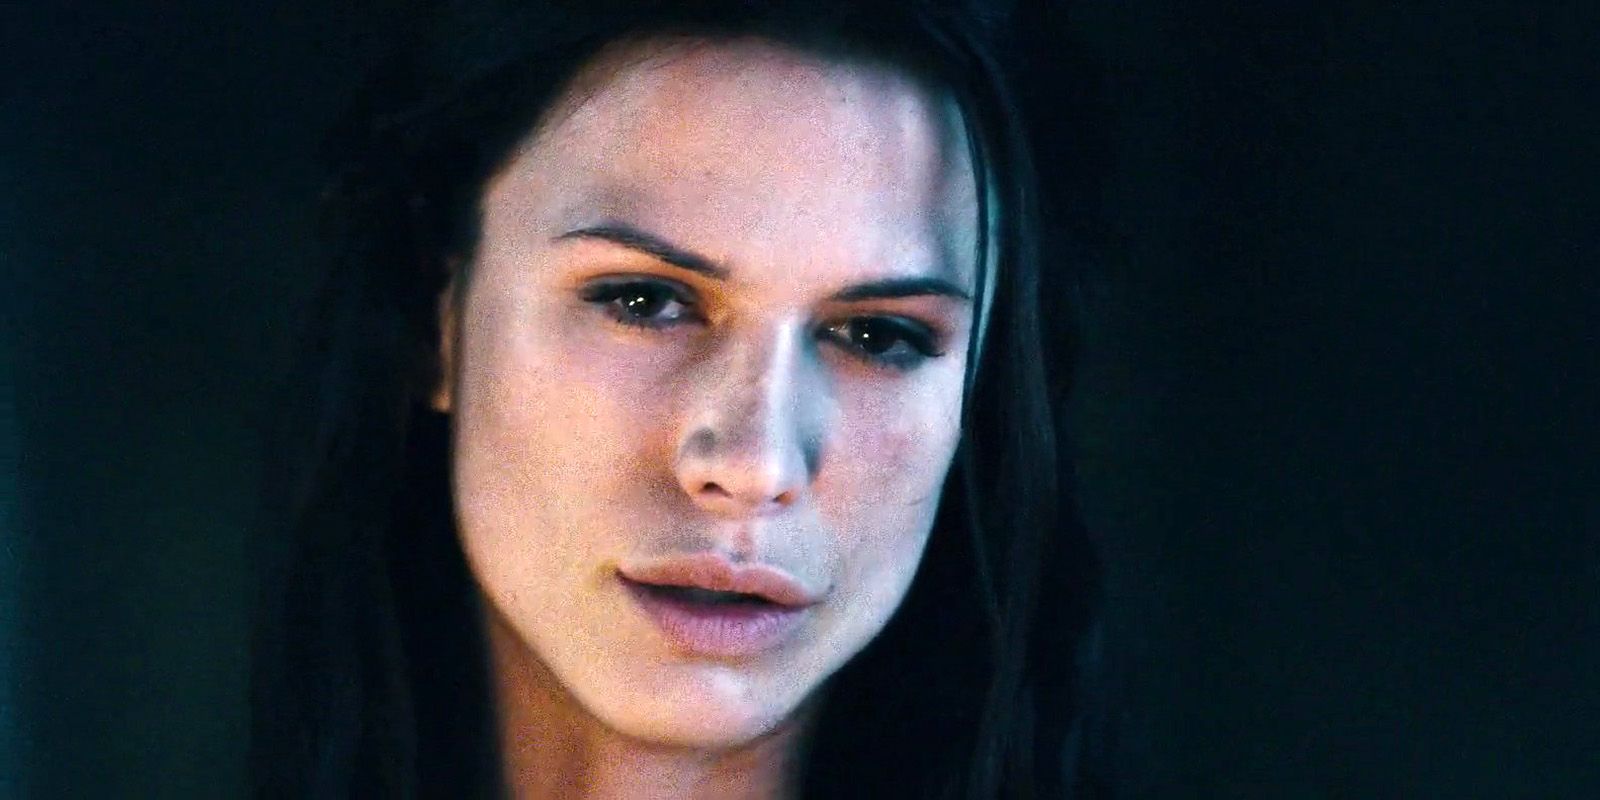 Underworld-Rise-of-the-Lycans-and-Doomsday-star-Rhona-Mitra-is-set-to-star-in-the-action-film-with-Captain-America-actor-Frank-Grillo..jpg